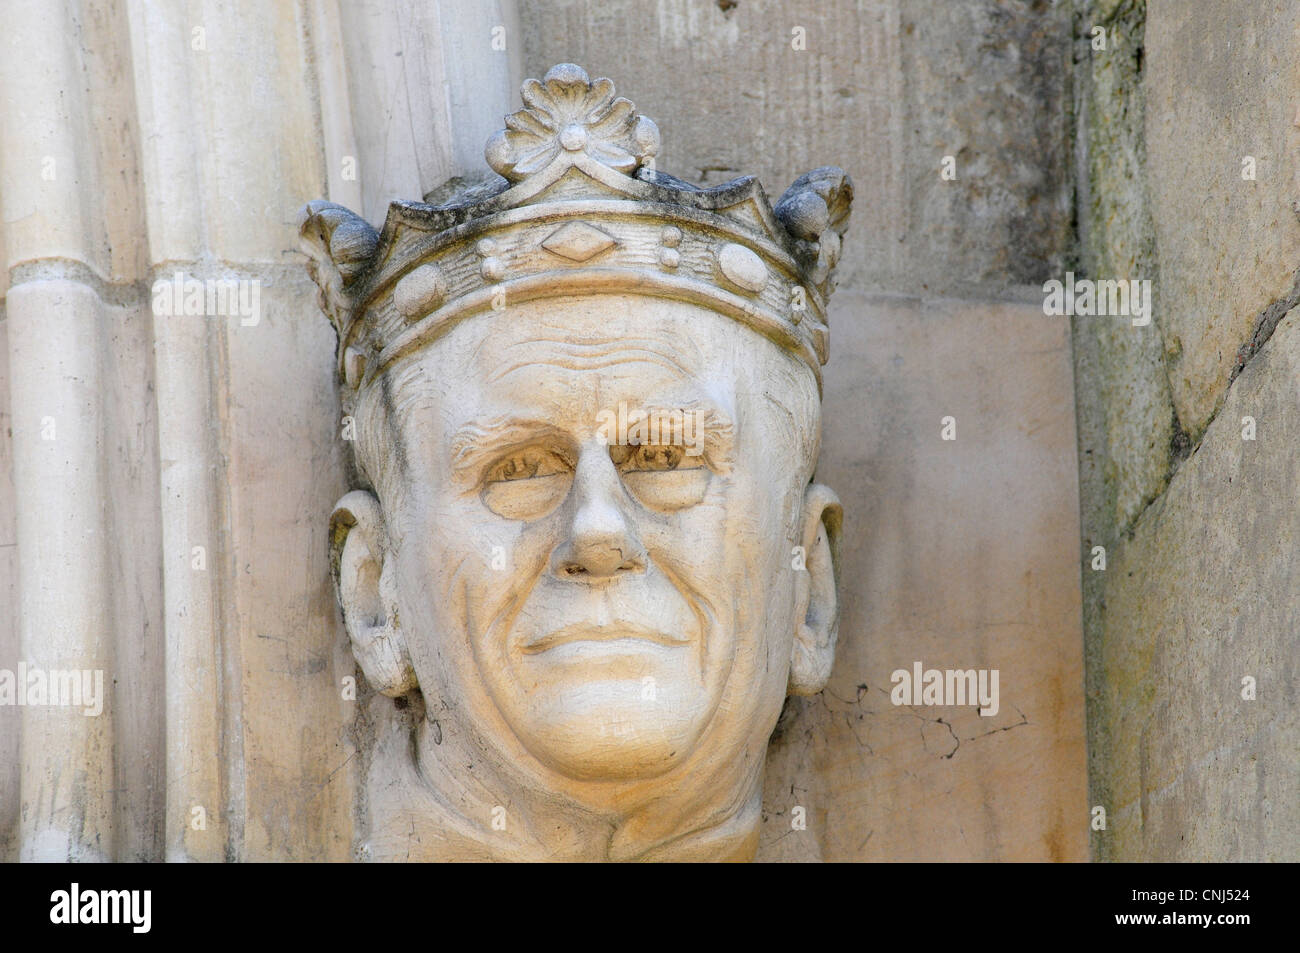 Sculptured likeness of Prince Philip Duke of Edinburgh on the West Door or Galilee of Chichester Cathedral Stock Photo